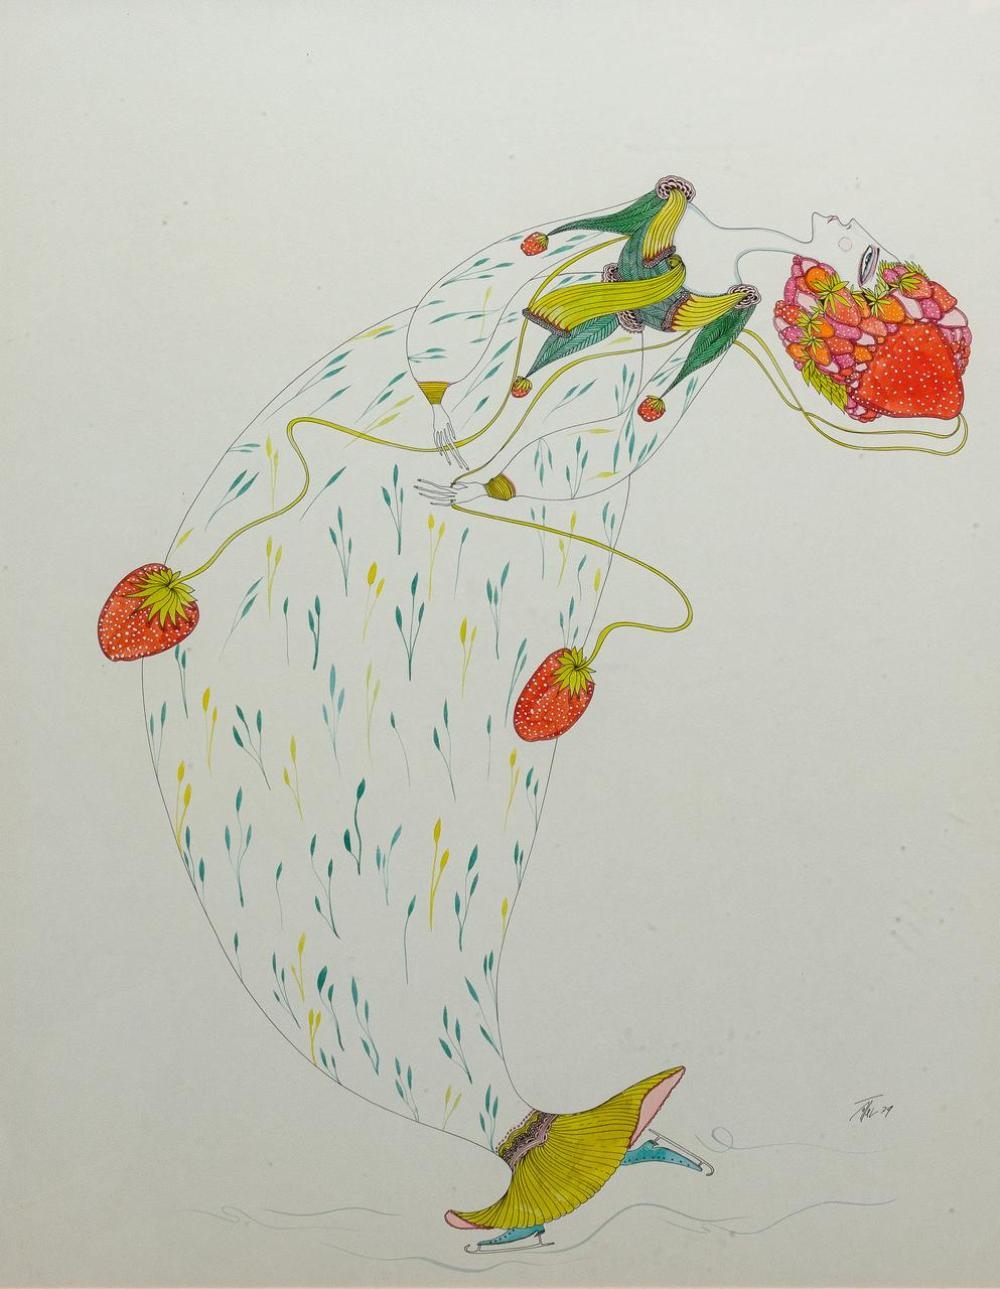 Strawberry Delight by Toller Cranston, 1979